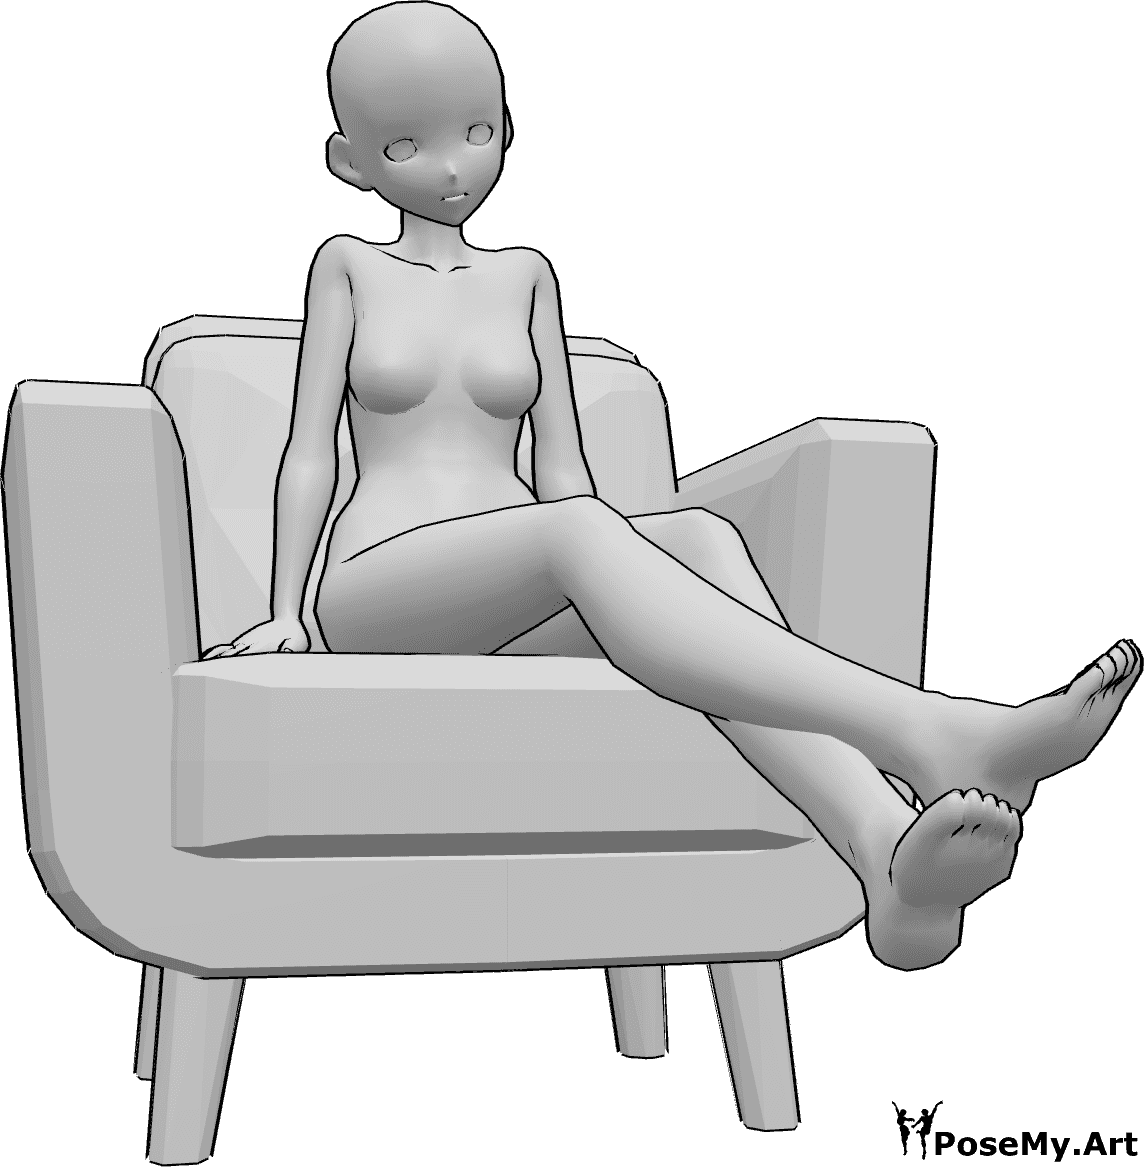 Pose Reference- Anime raising legs pose - Anime female is sitting in the armchair and raising her legs